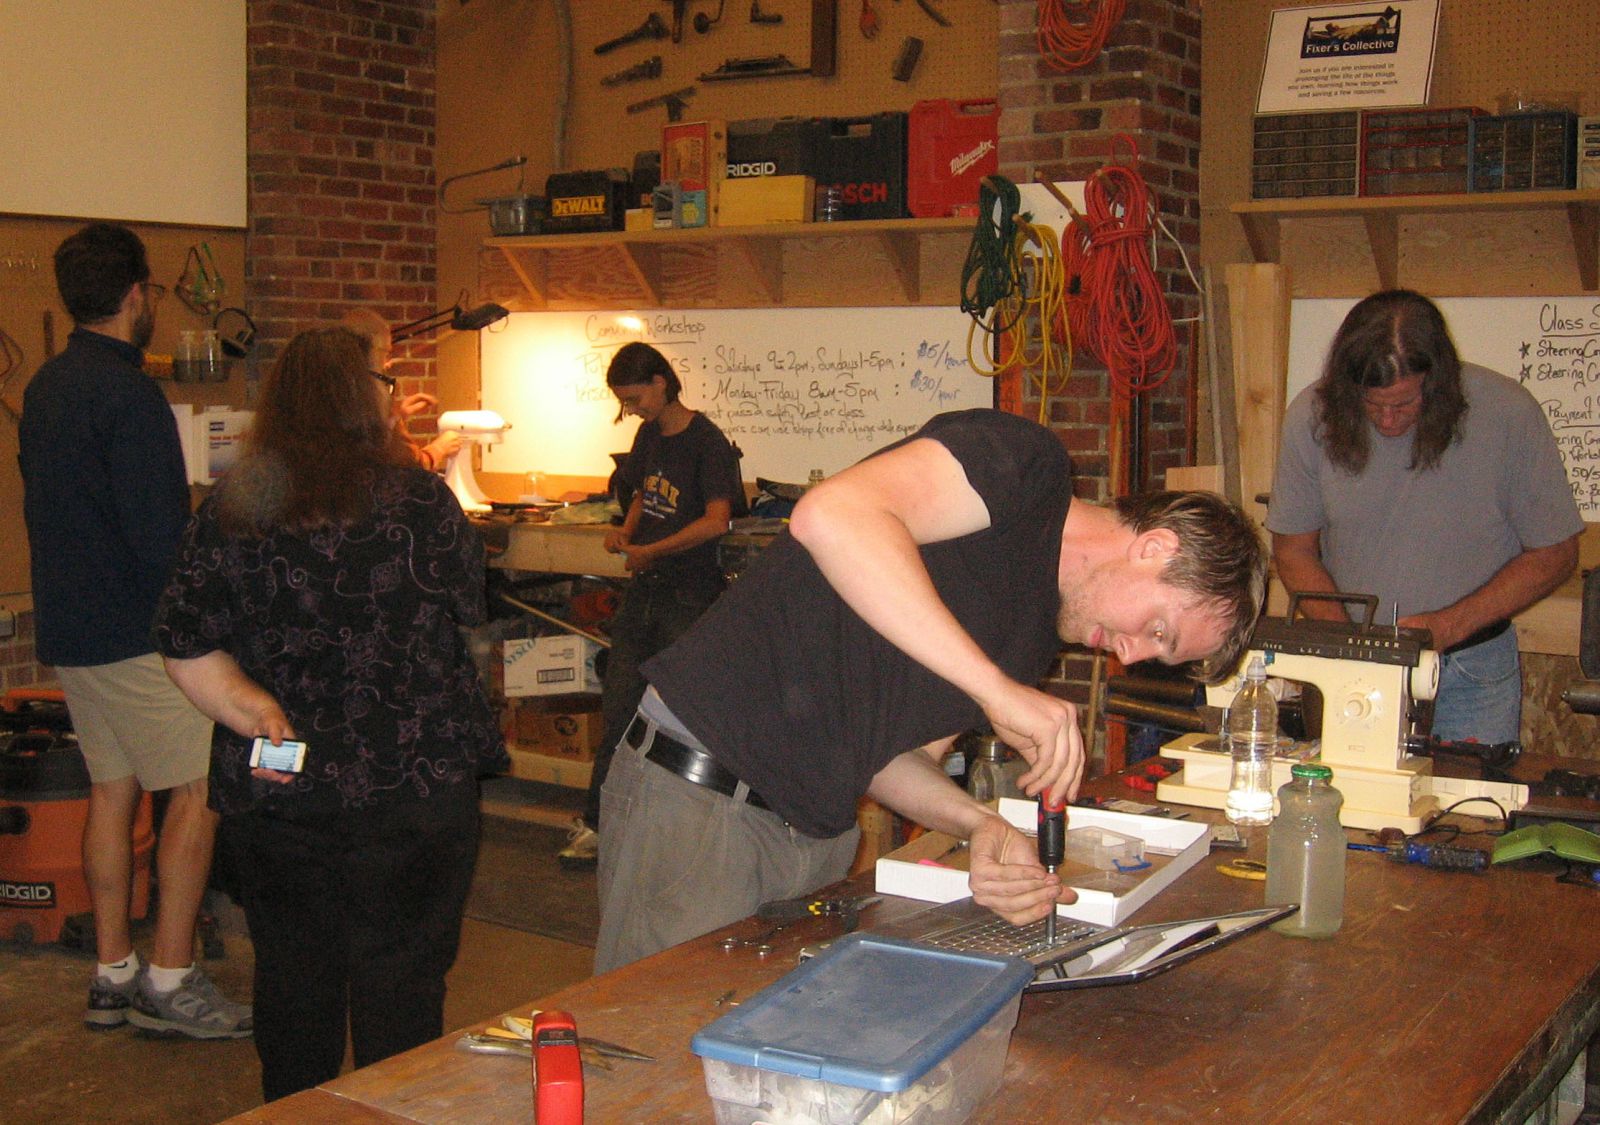 West Seattle Fixers’ Collective at work. Photo West Seattle Tool Library